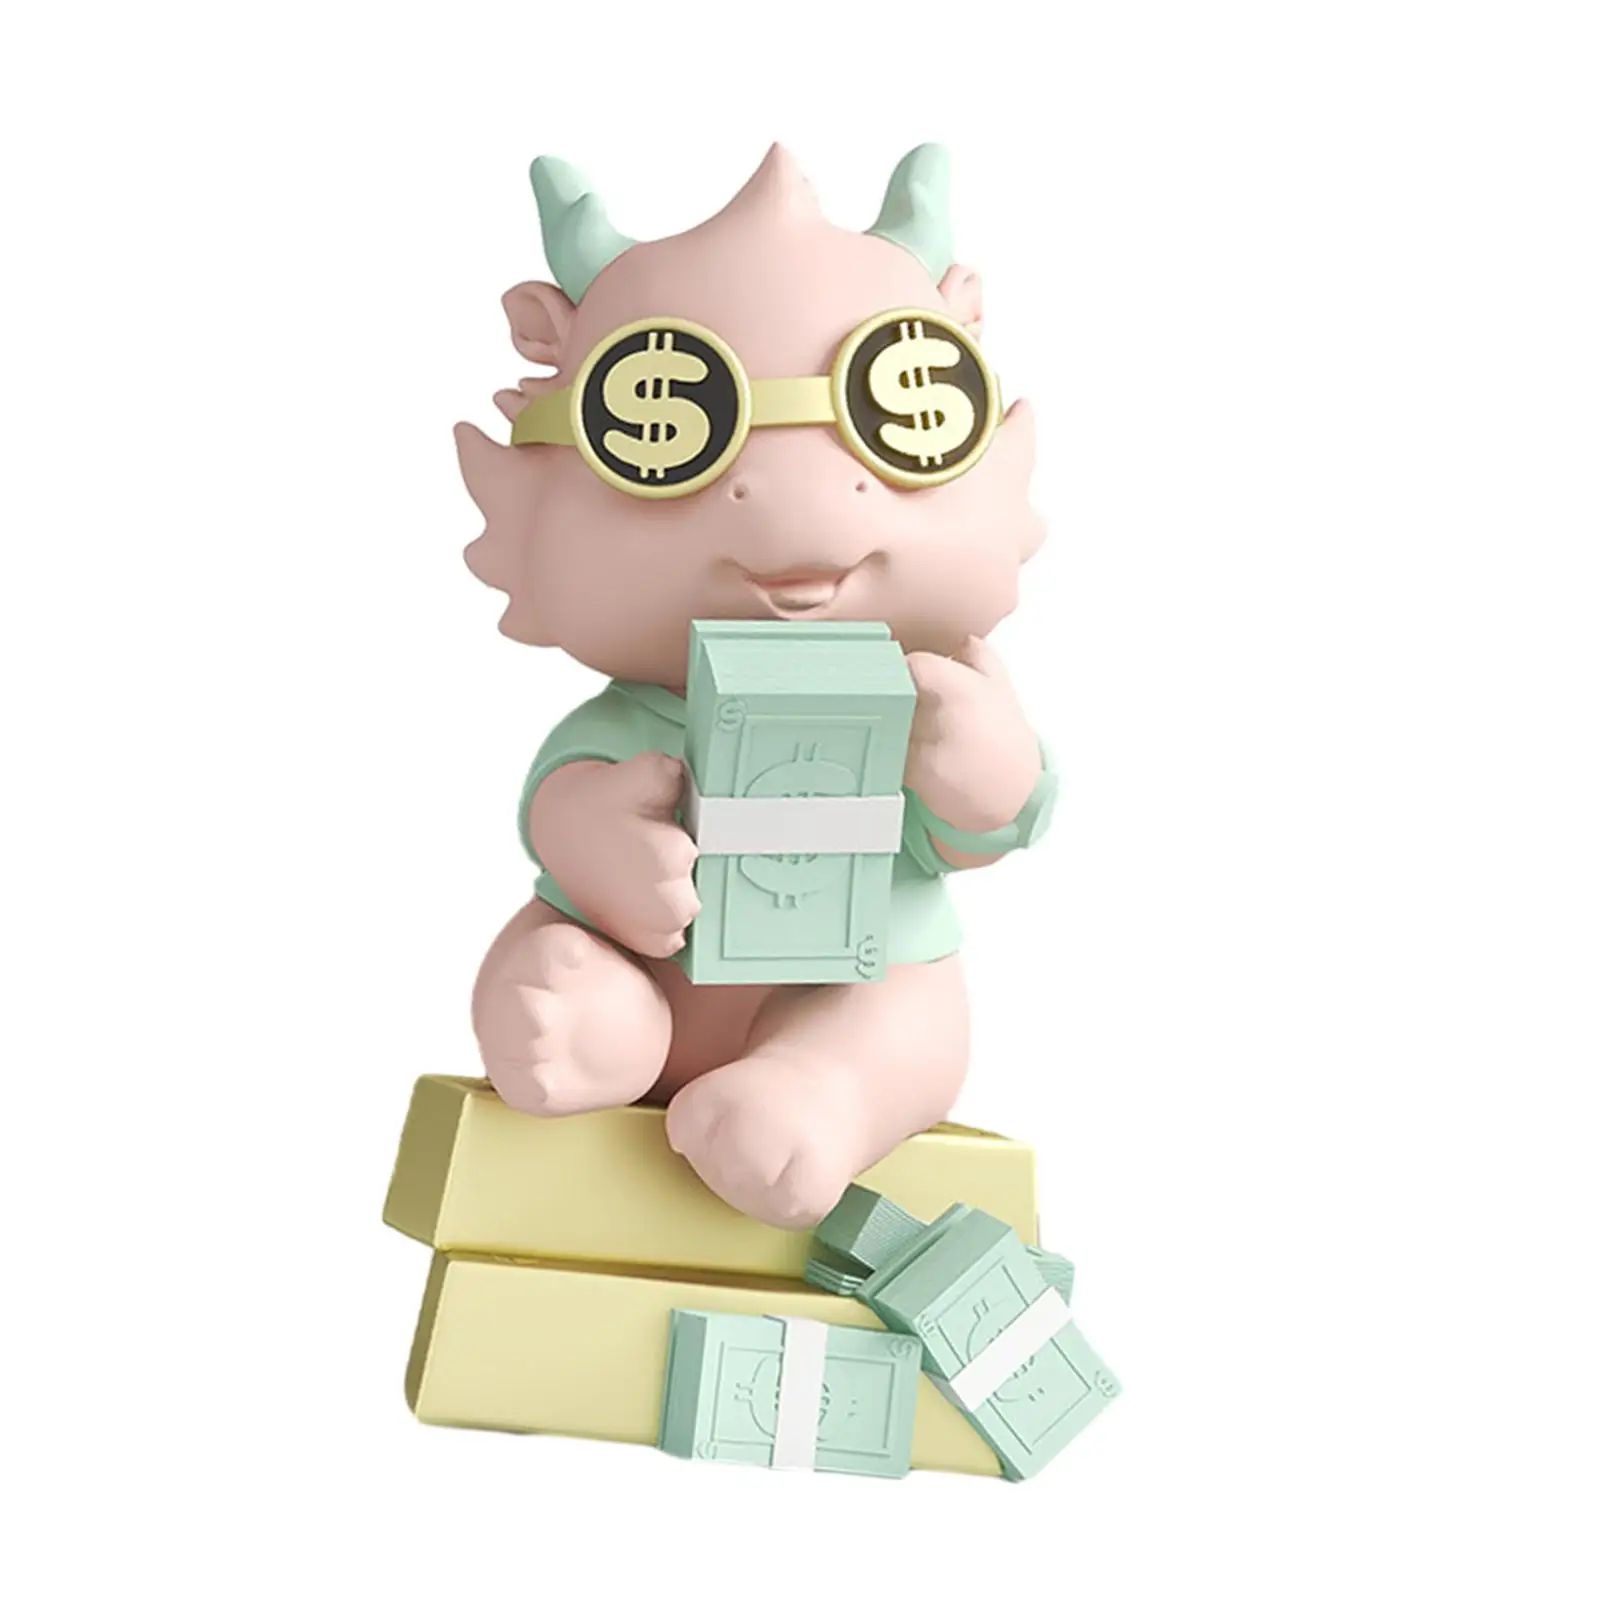 Dragon Statue Money Bank Resin Ornament for Stores New Year Gifts Apartment